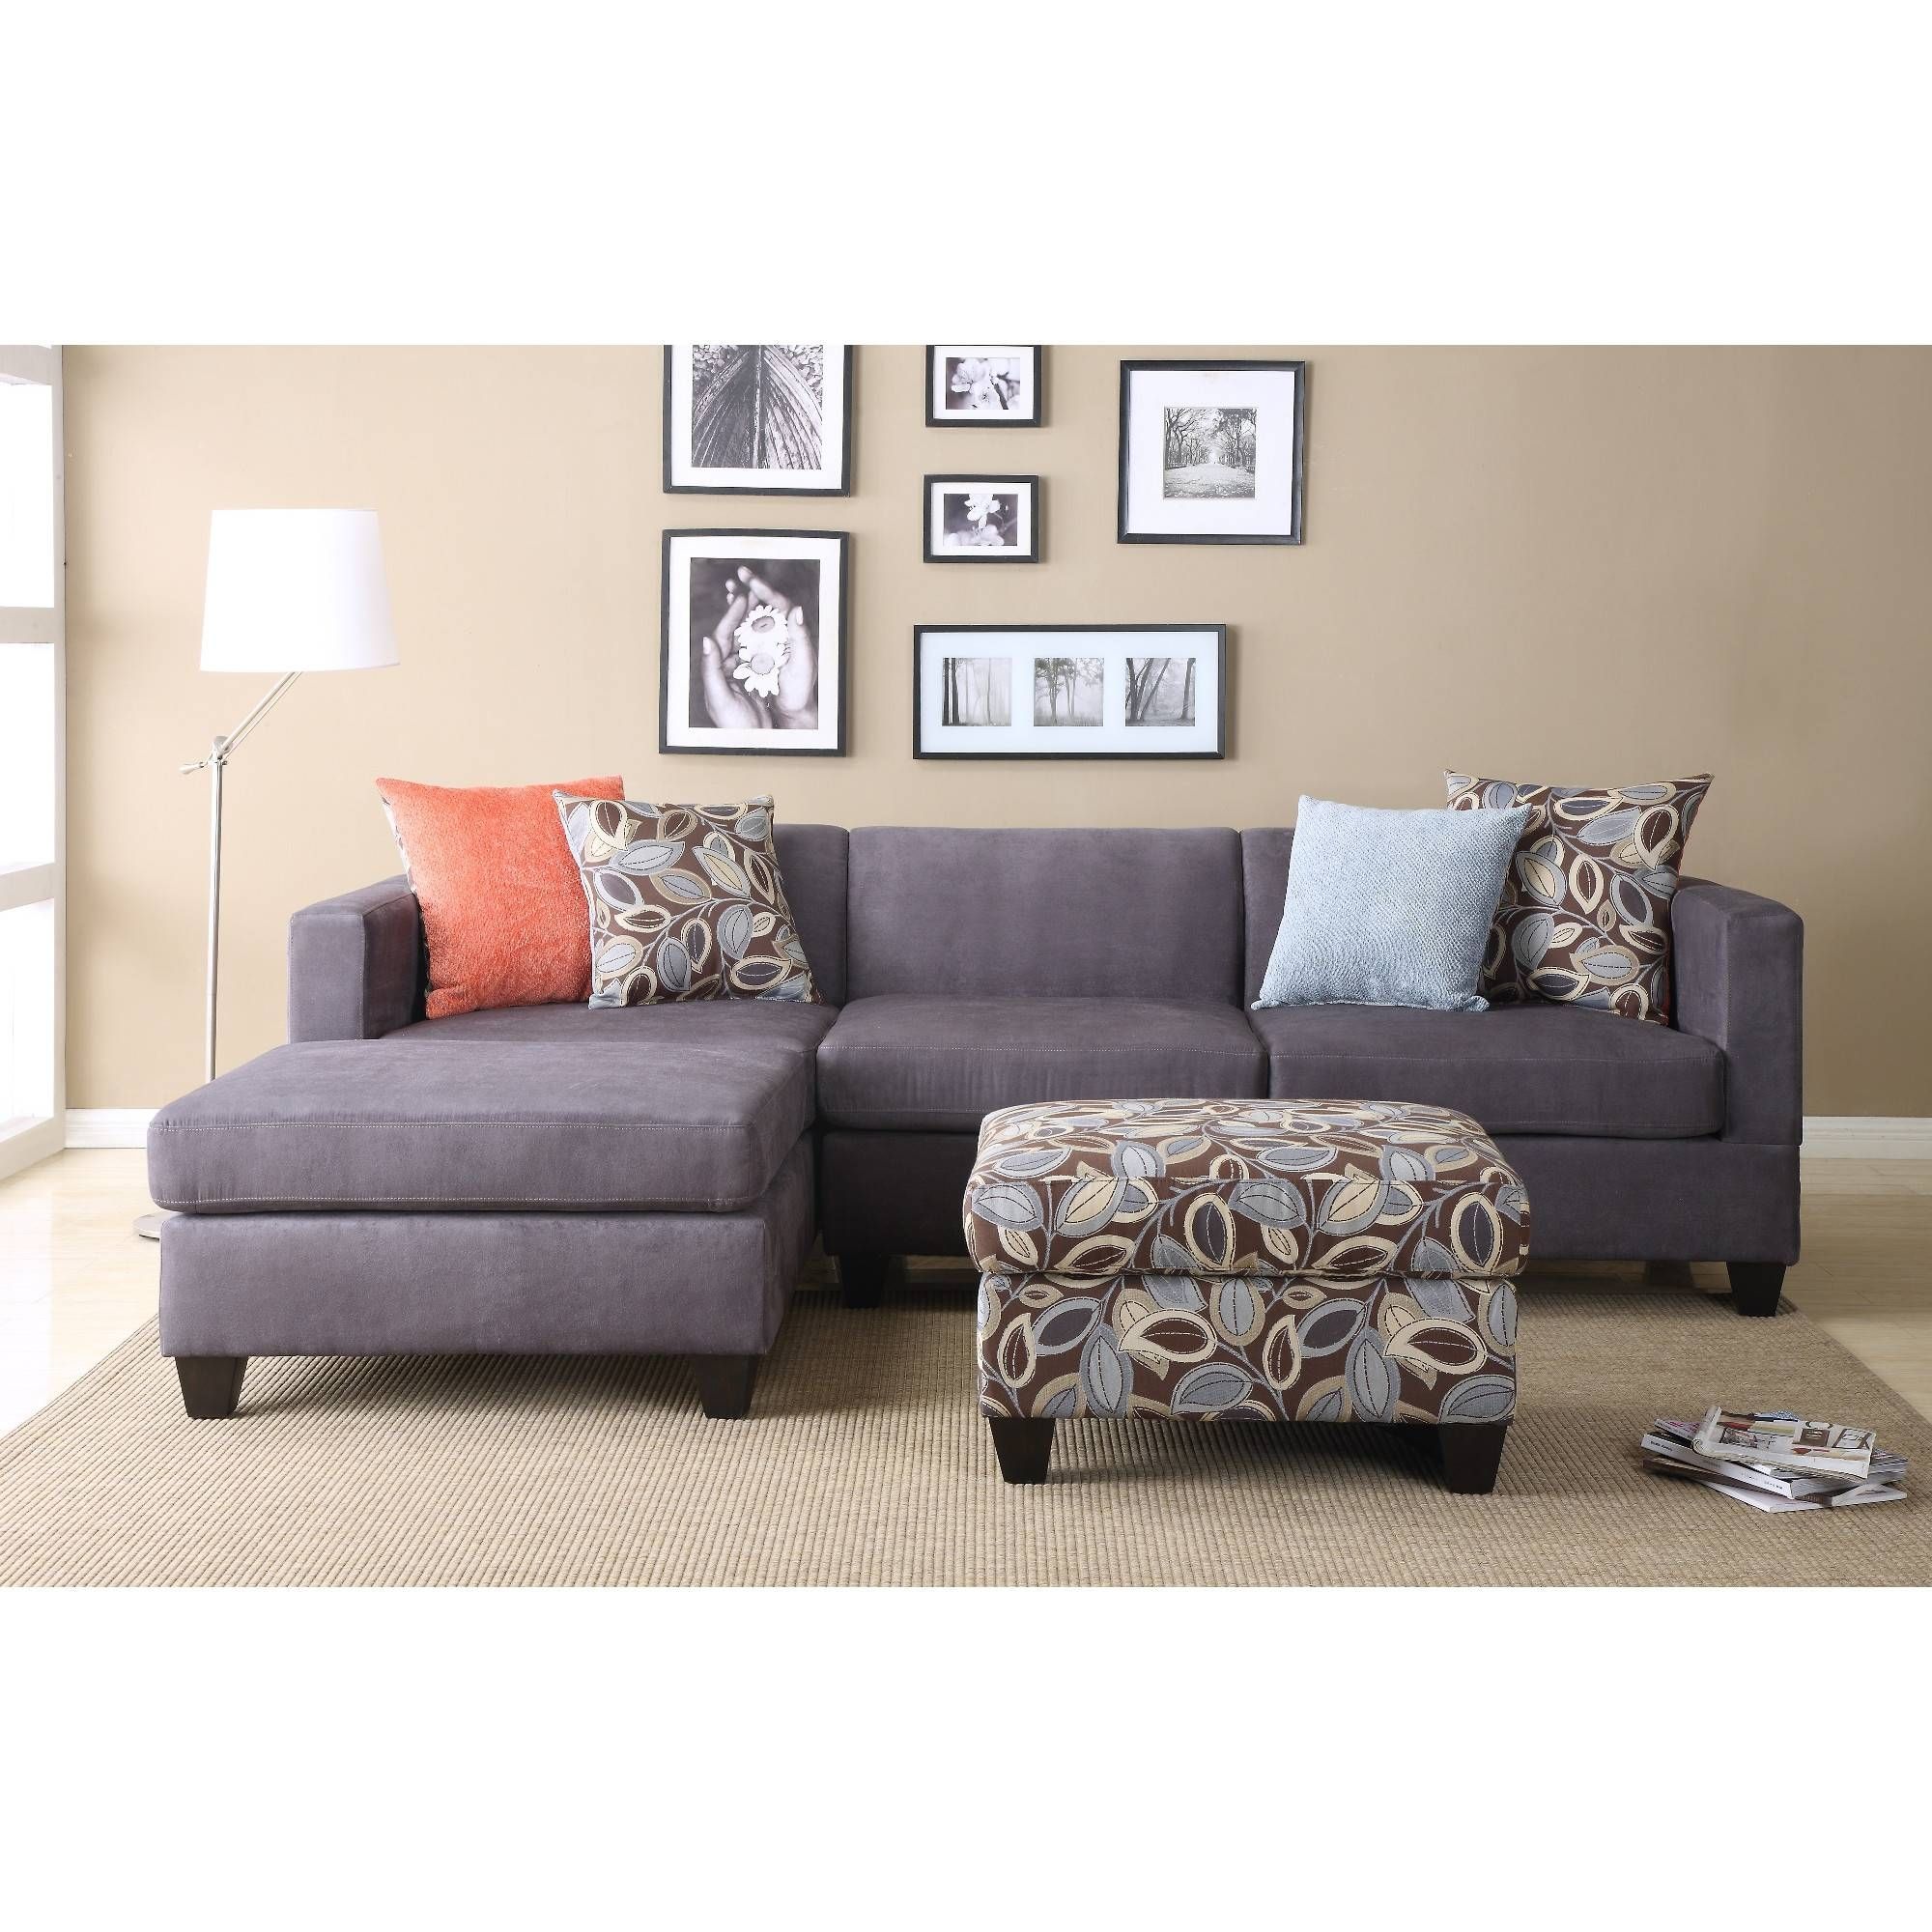 Sofas Center : Singular Cindy Crawford Sectional Sofa Pictures Intended For Cindy Crawford Sofas (View 24 of 30)